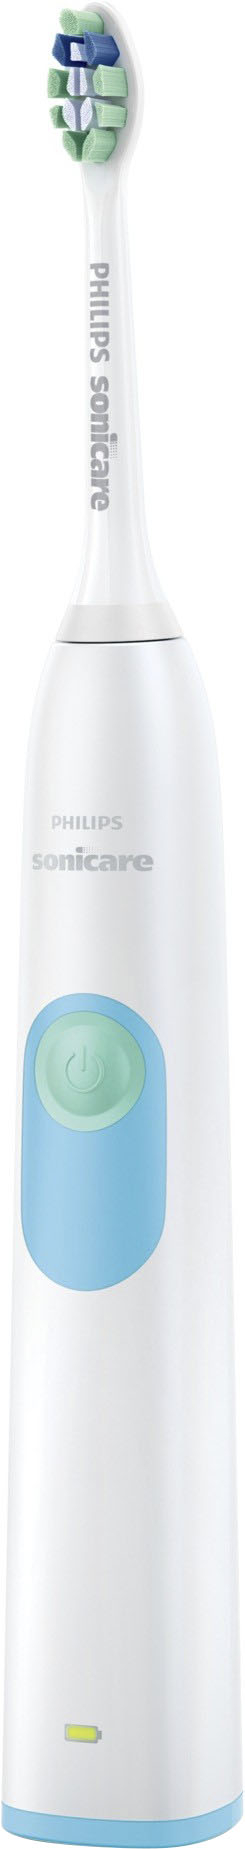 Left View: Philips Sonicare - Sonicare 2 Series Plaque Control Rechargeable Electric Toothbrush - White